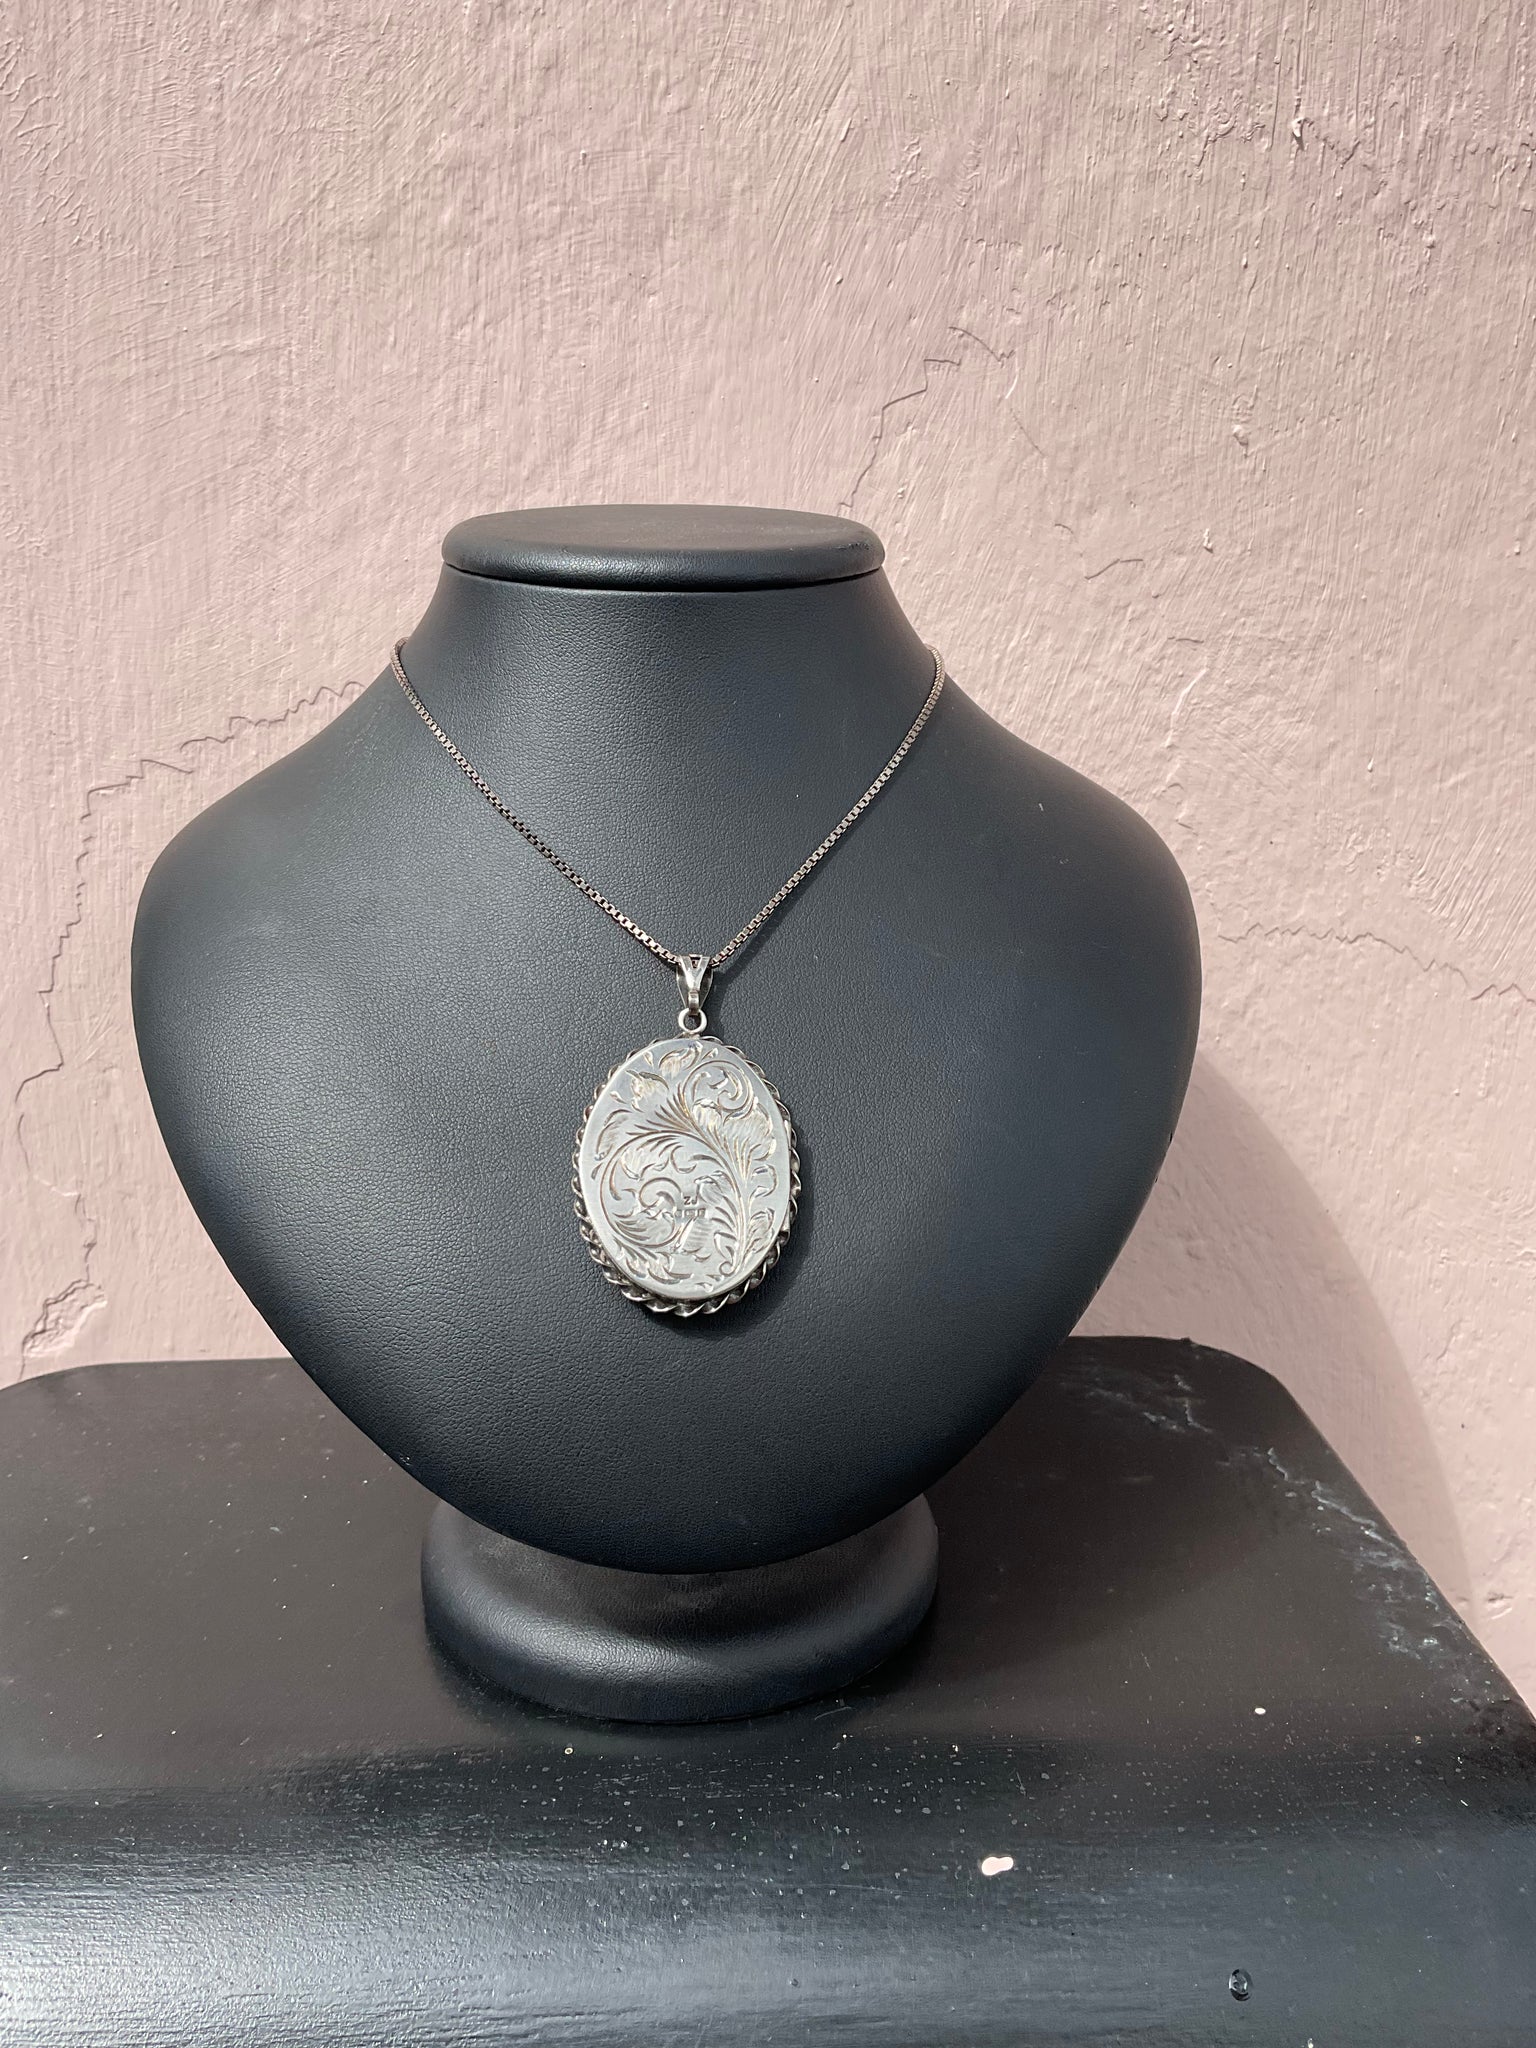 Vintage Silver Engraved Locket and Chain